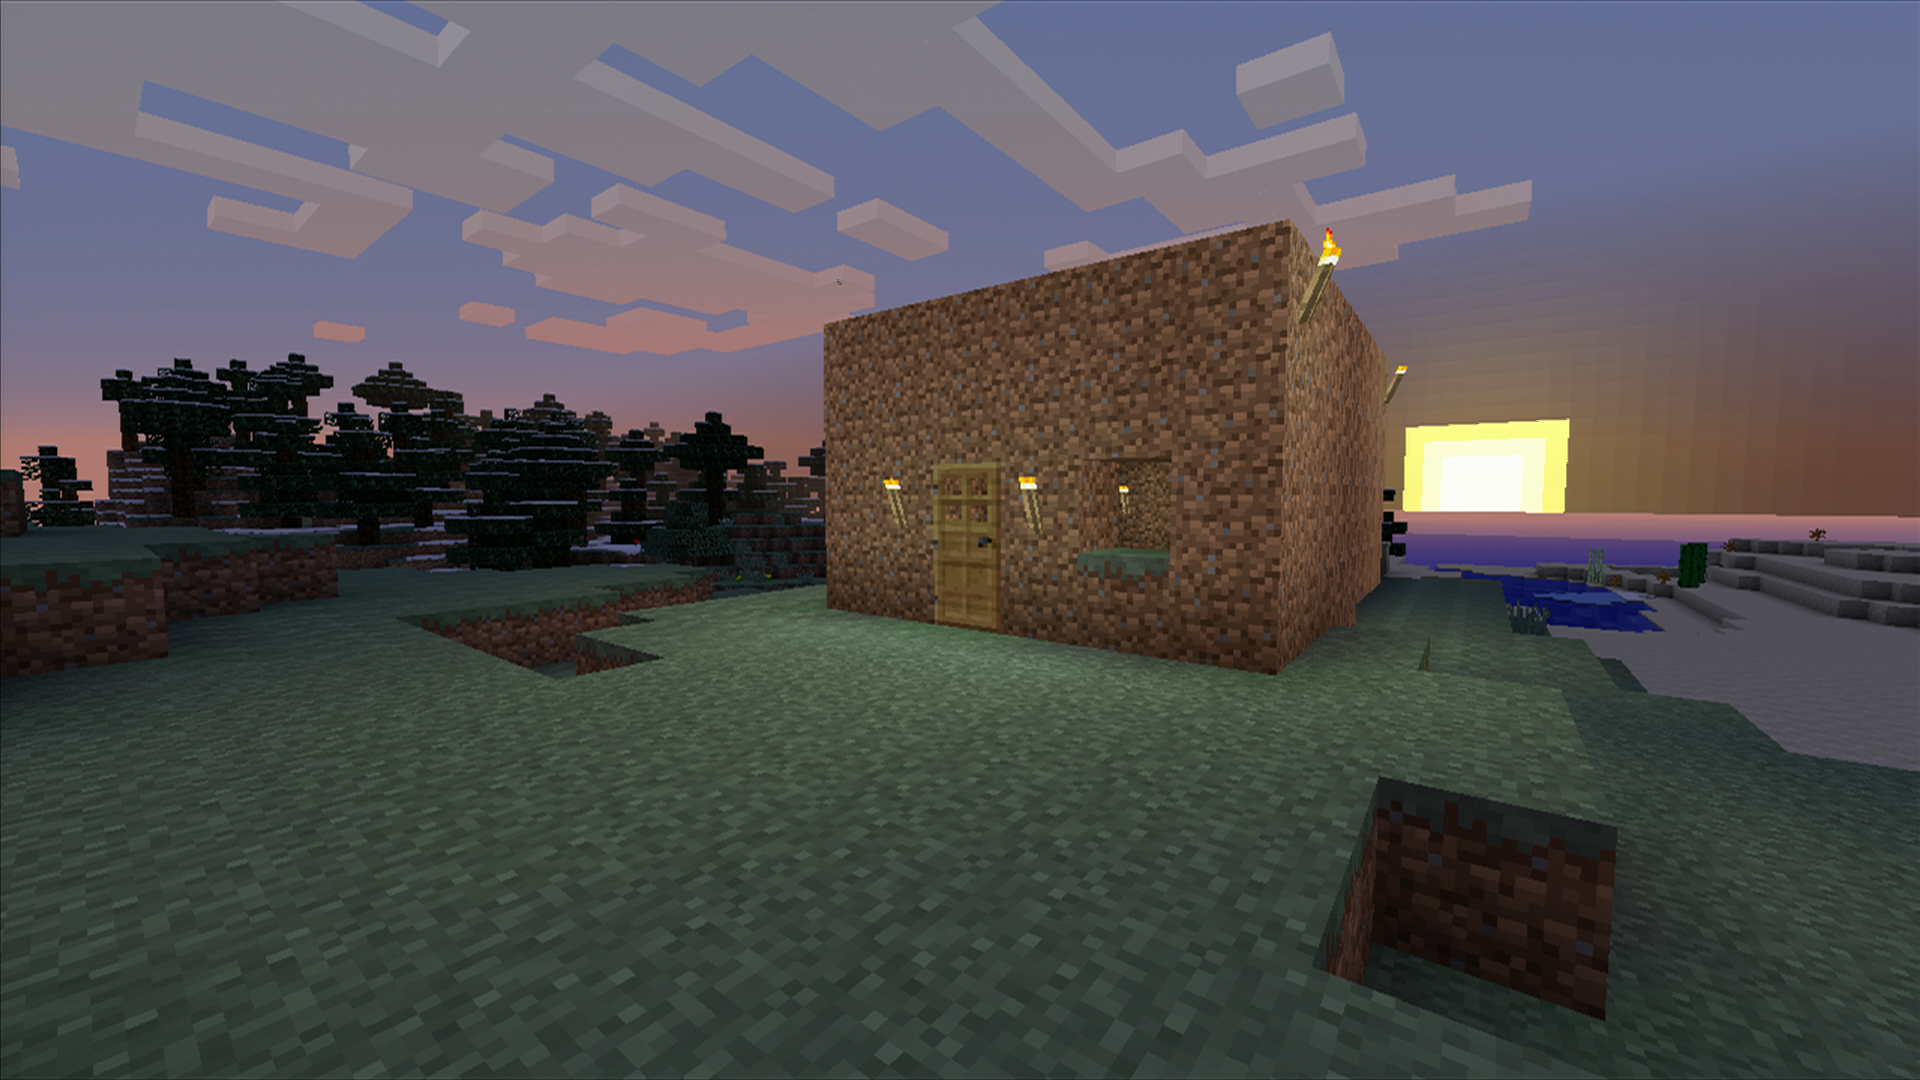 System-Driven Design example: Day/Night Cycle system in Minecraft game